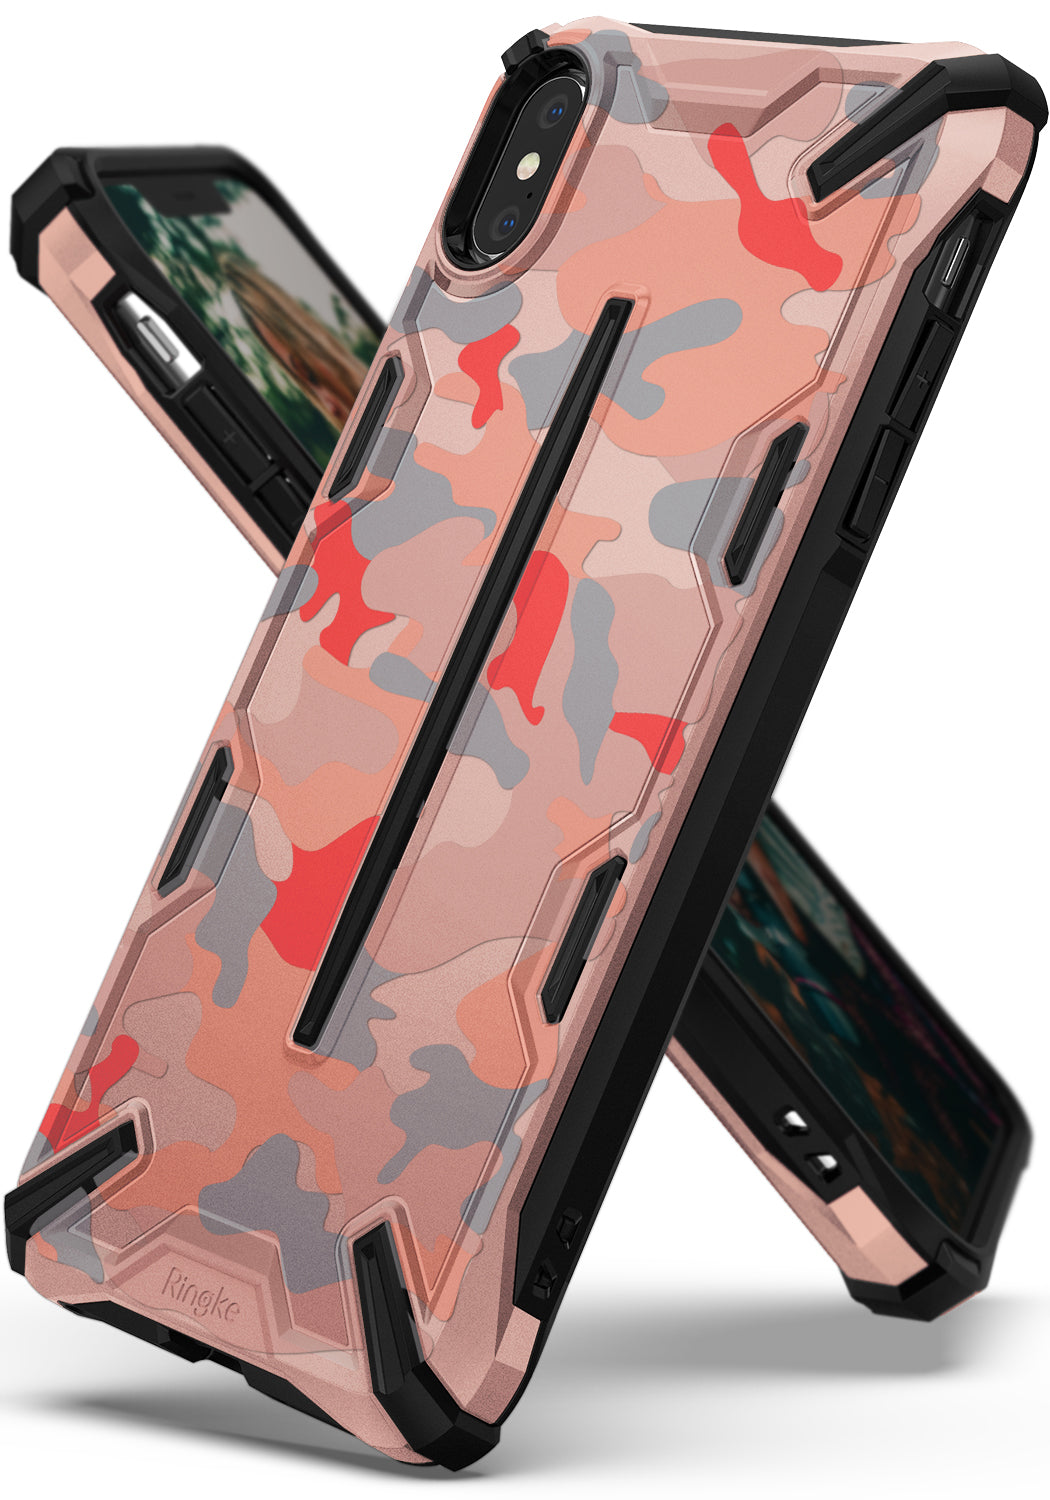 ringke dual-x design for apple iphone xs max case cover main